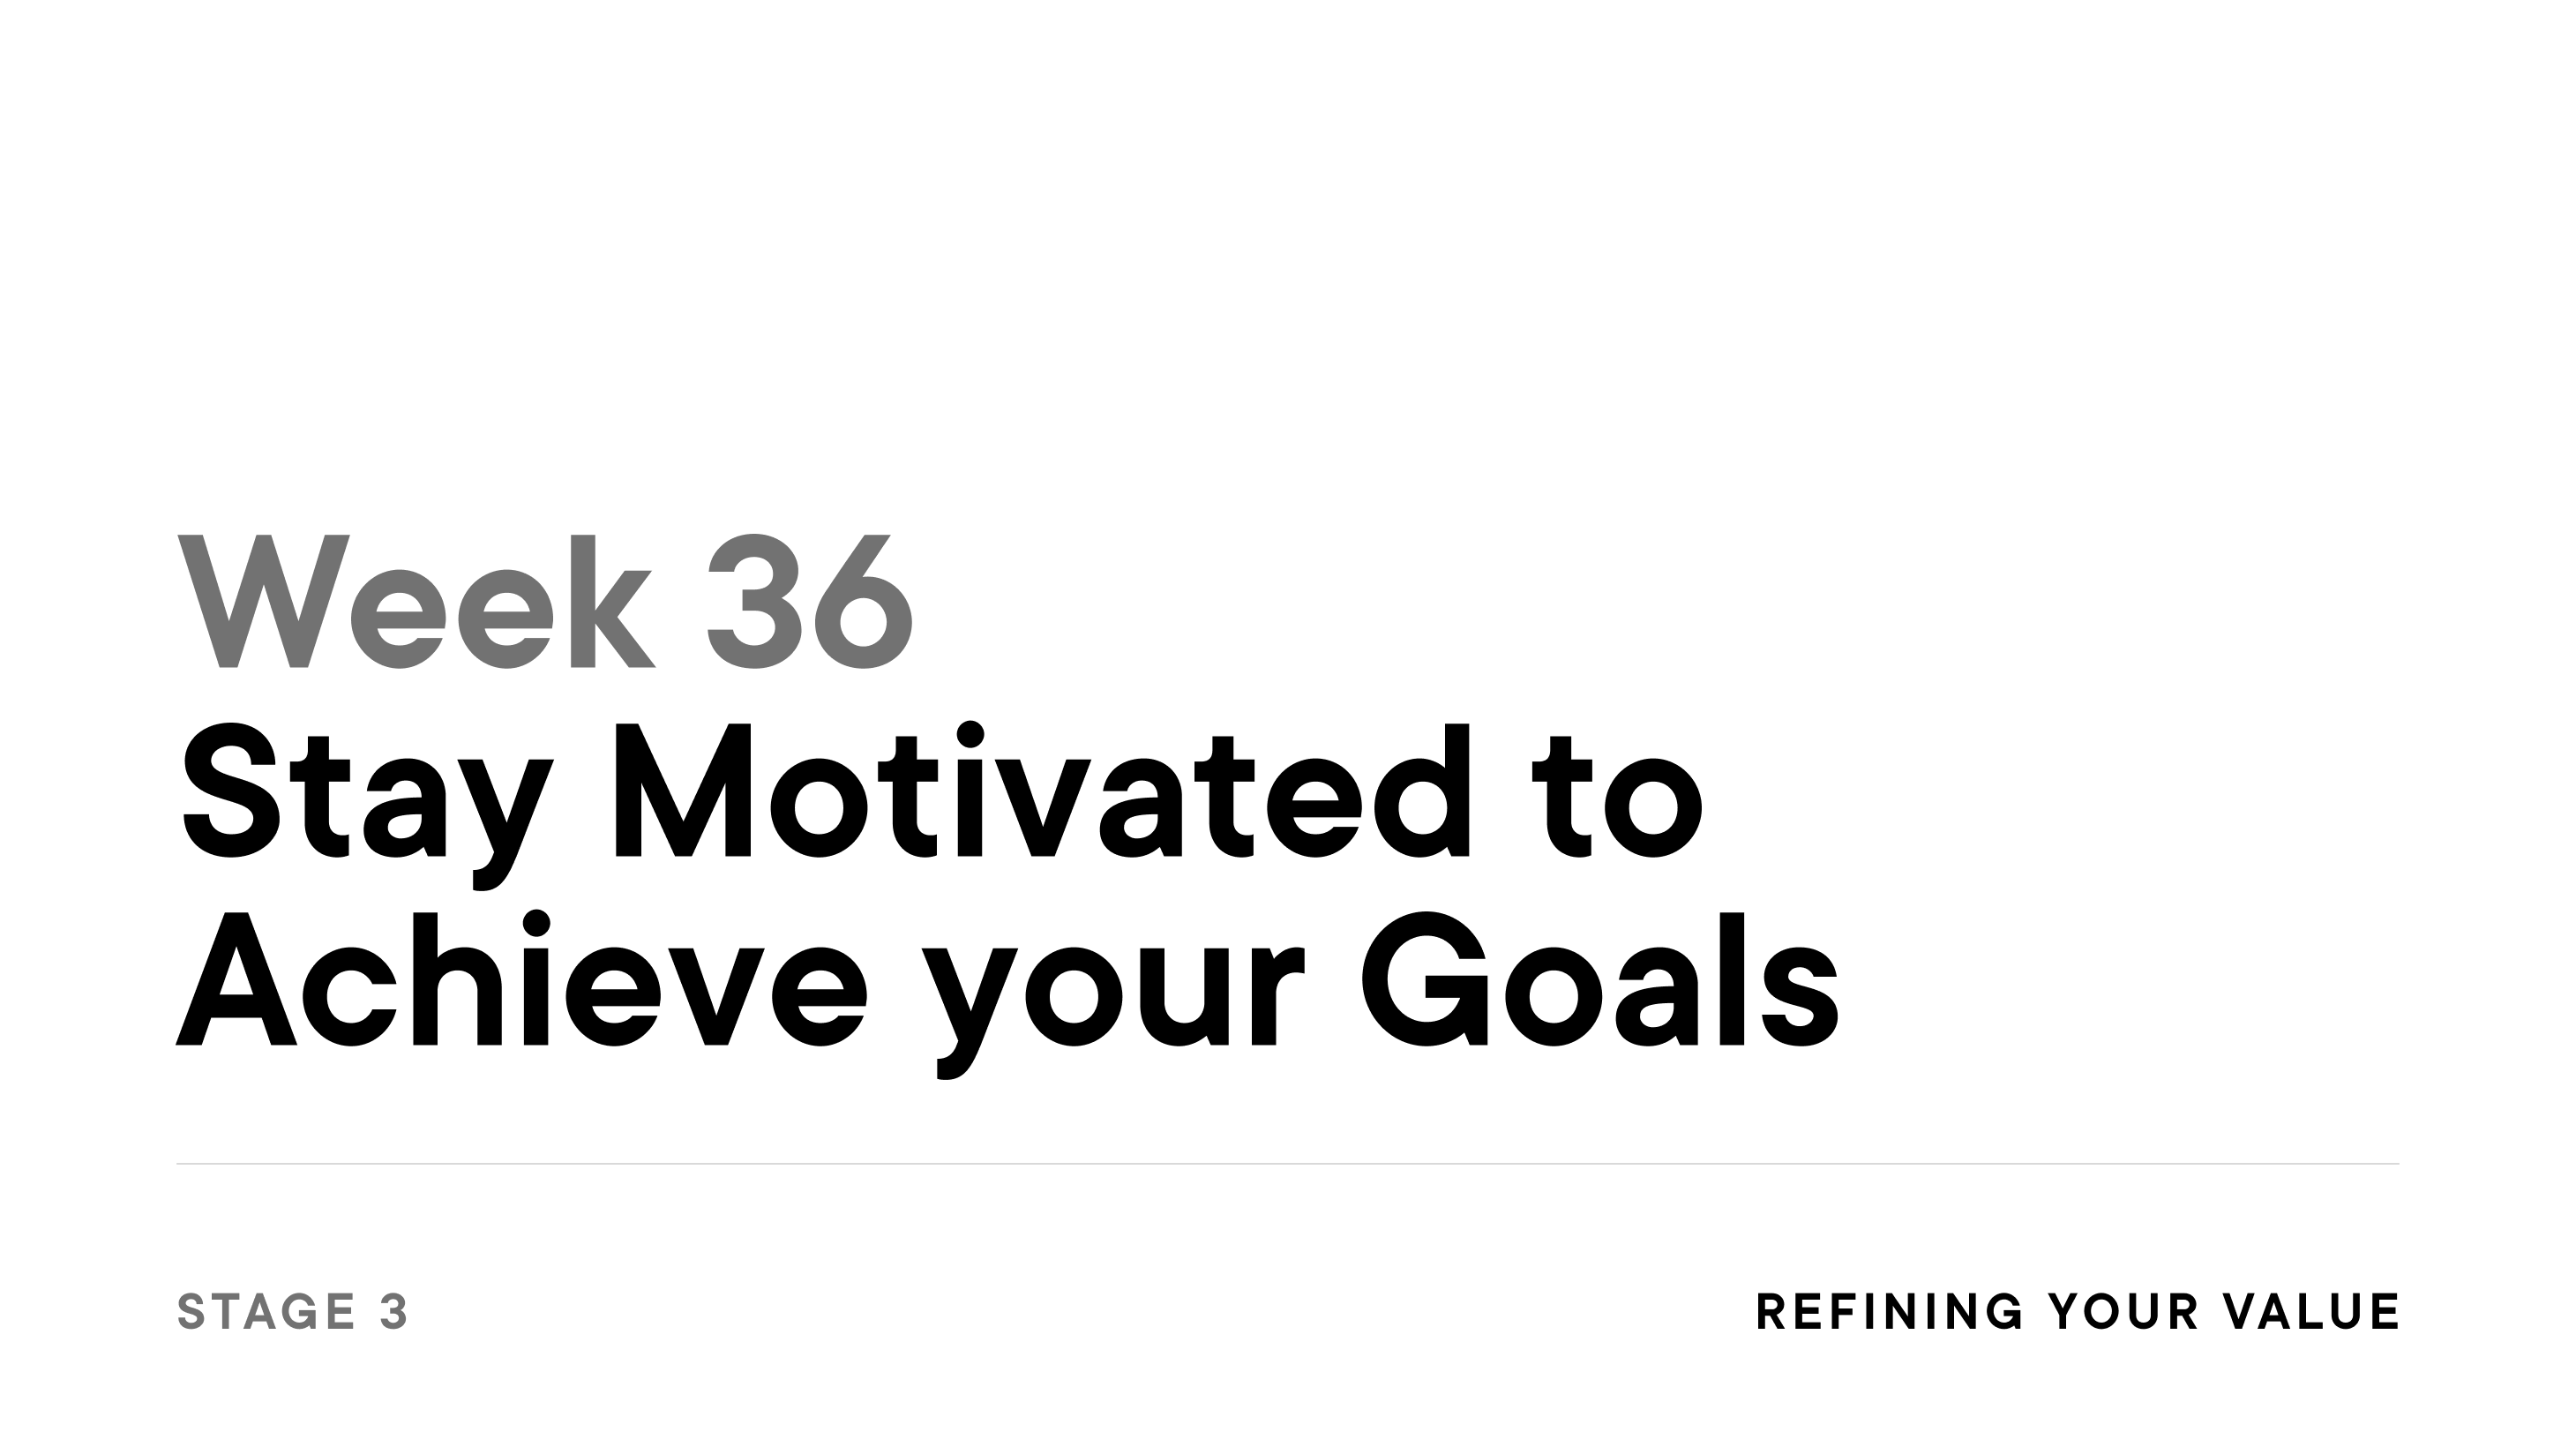 Week 36: Stay Motivated to Achieve your Goals